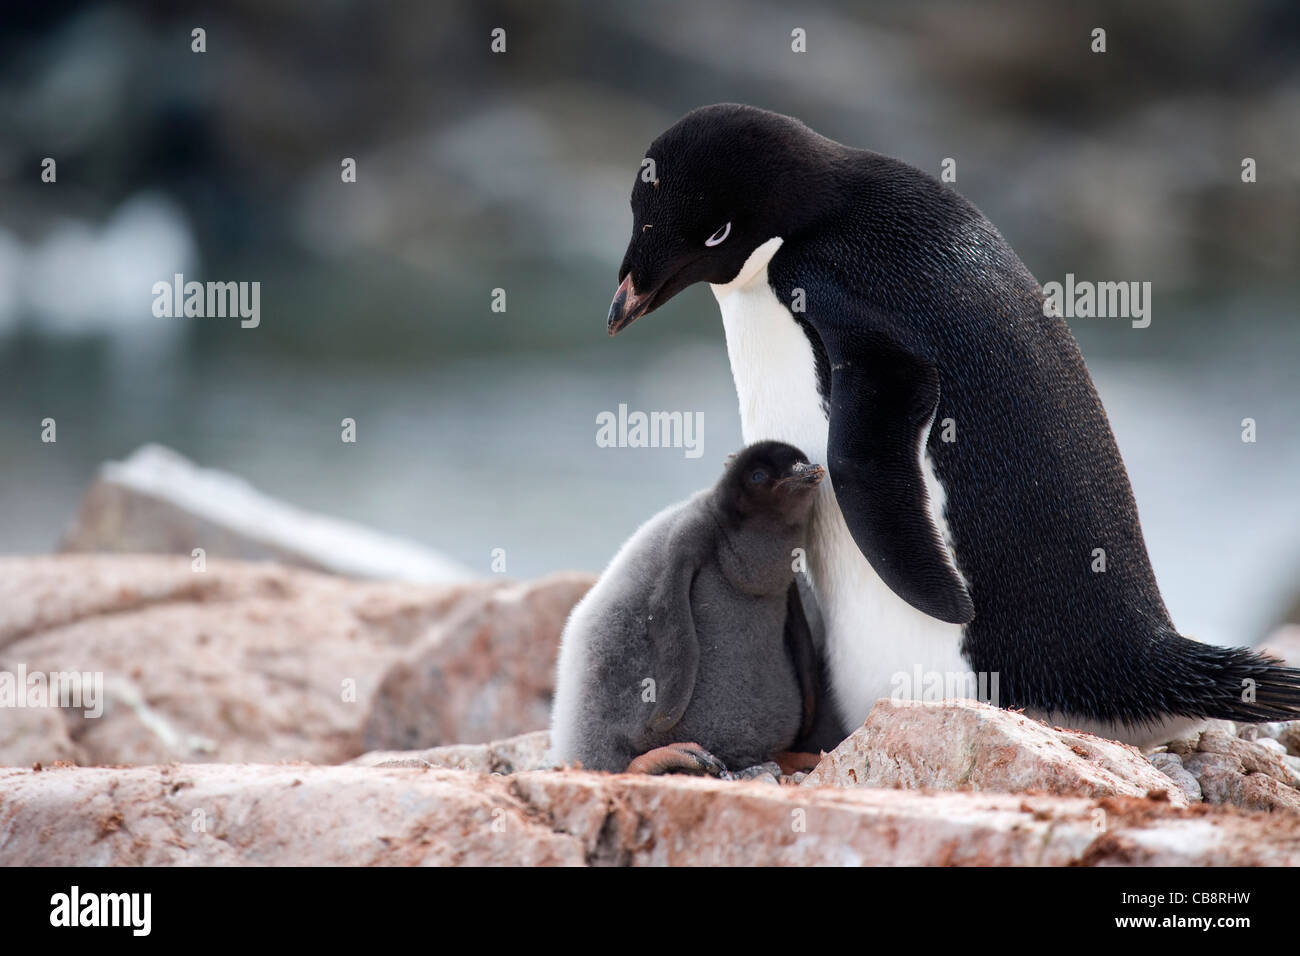 Adélie Penguin (Pygoscelis adeliae) with chick on nest in rookery at colony, Petermann Island, Antarctica Stock Photo